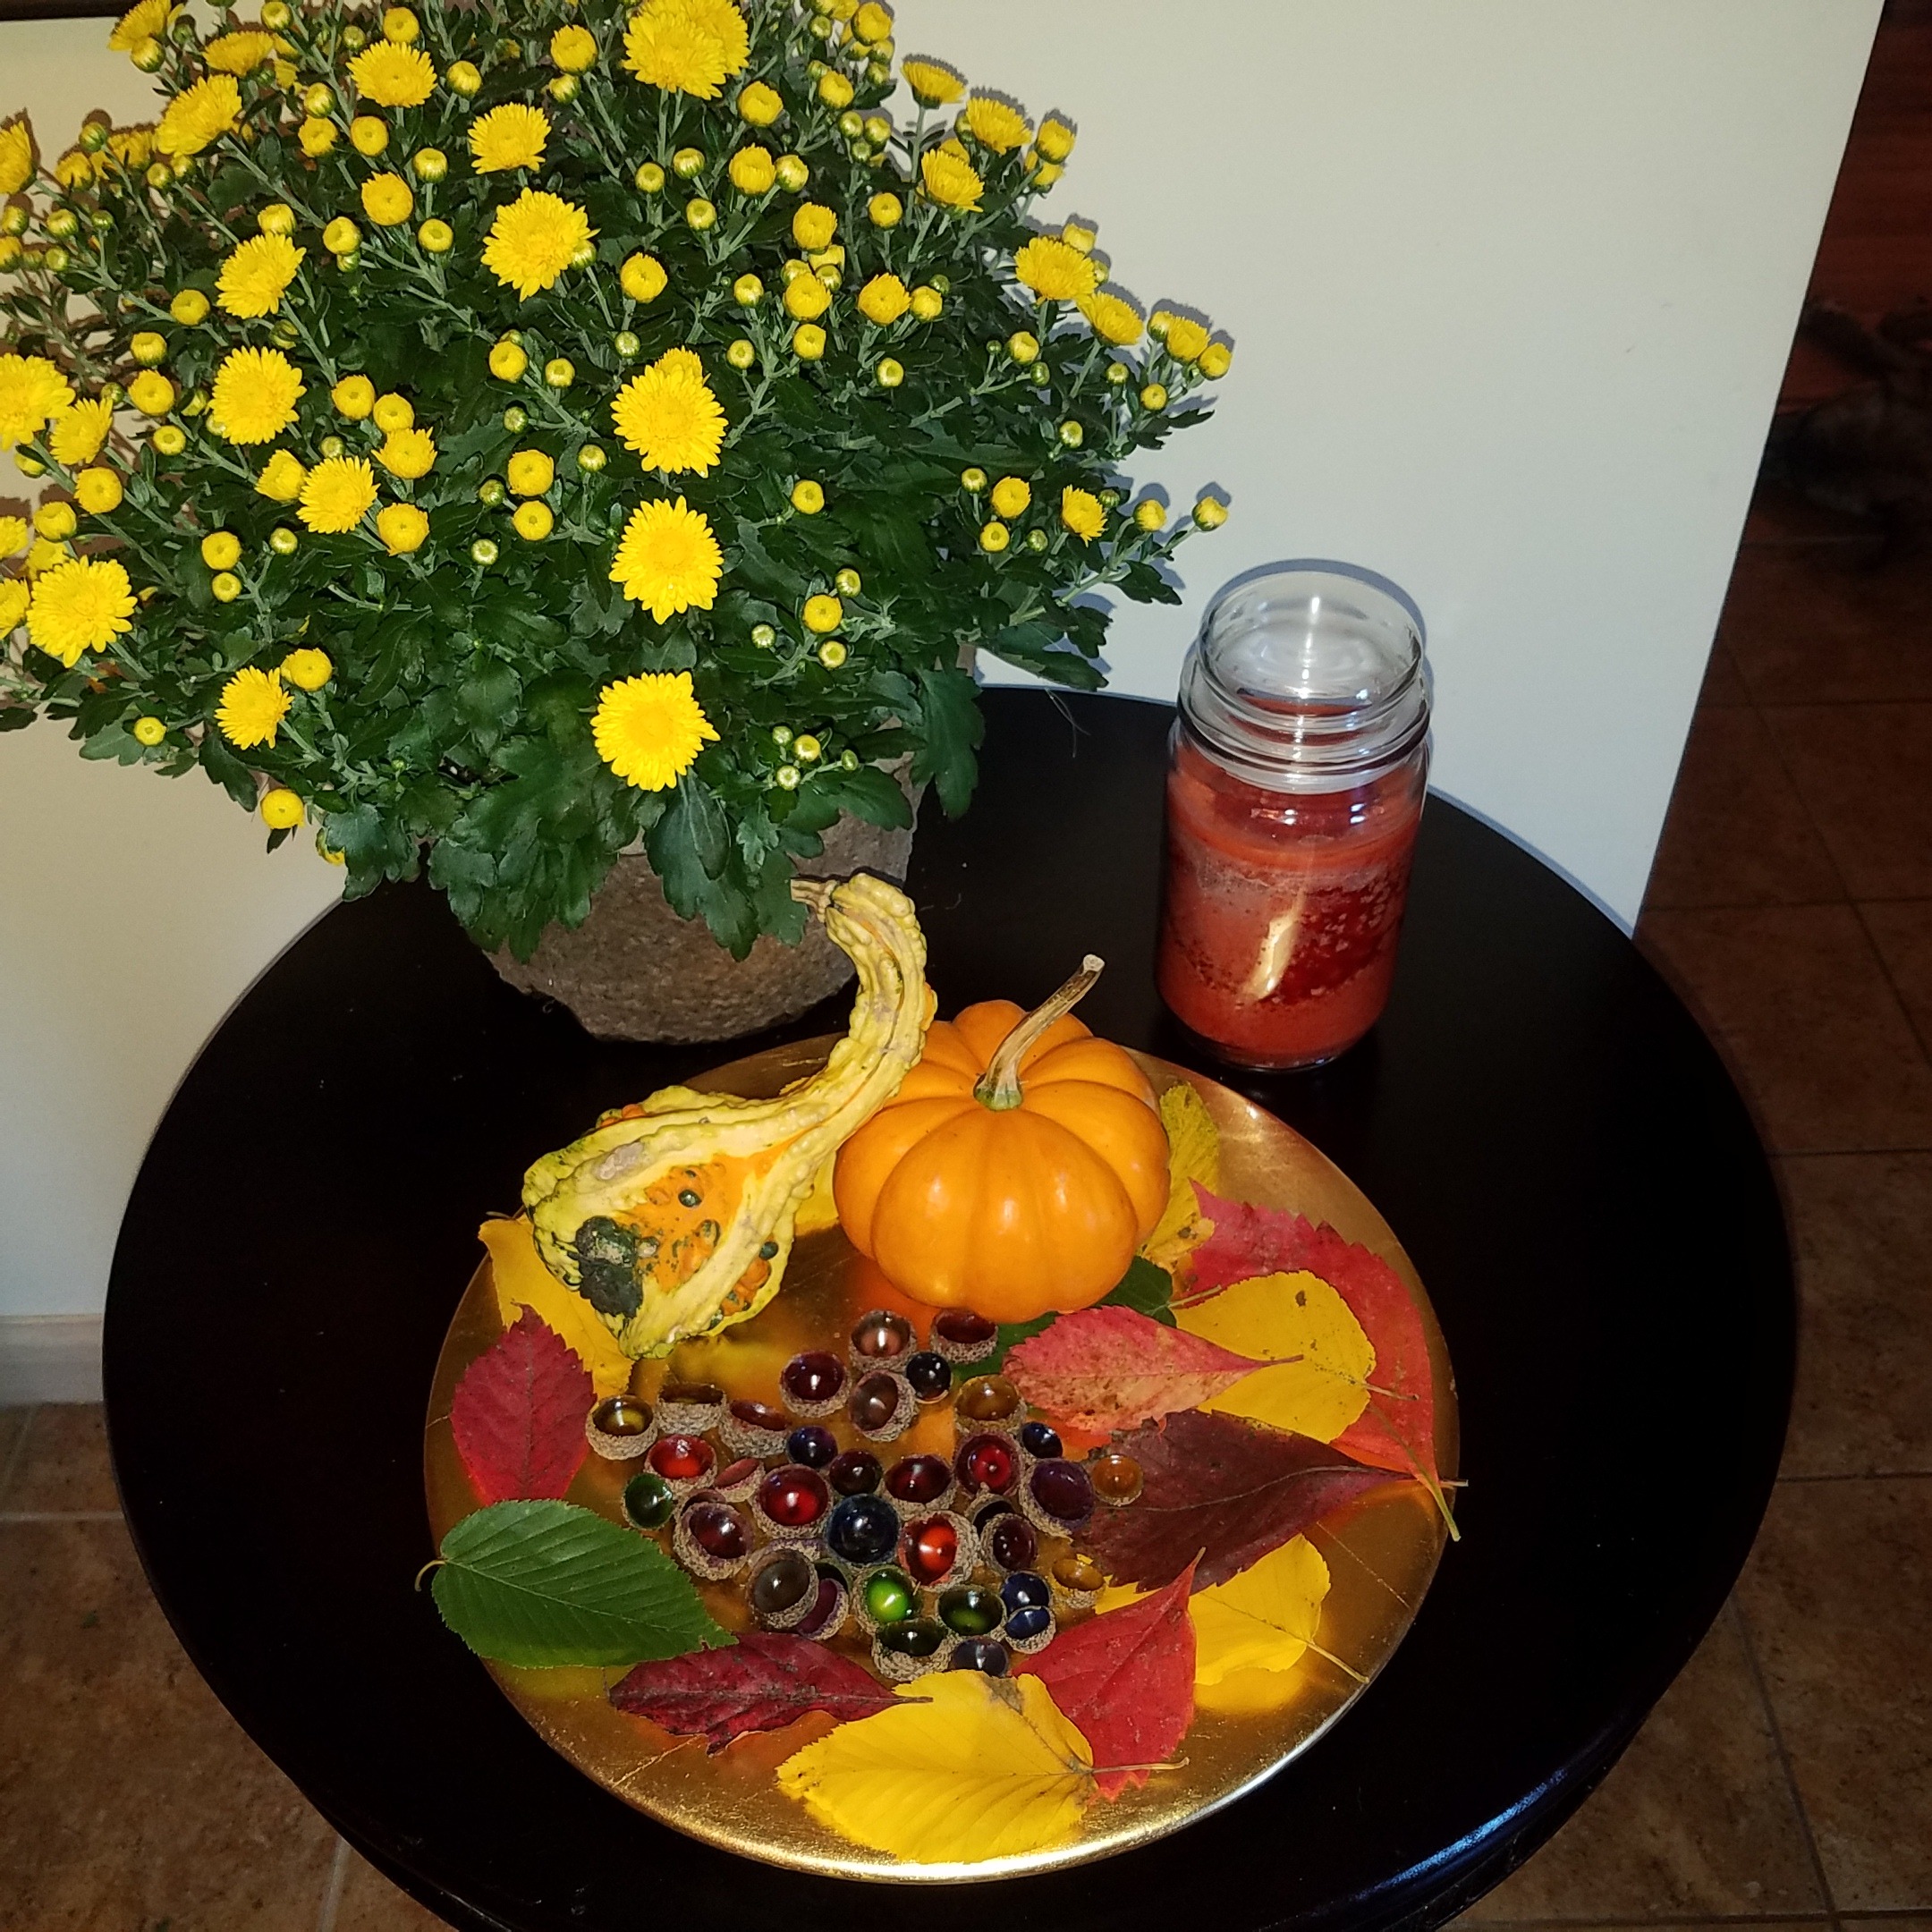 Colorful Fall centerpiece containing acorn gems, small pumpkin, and yellow mums